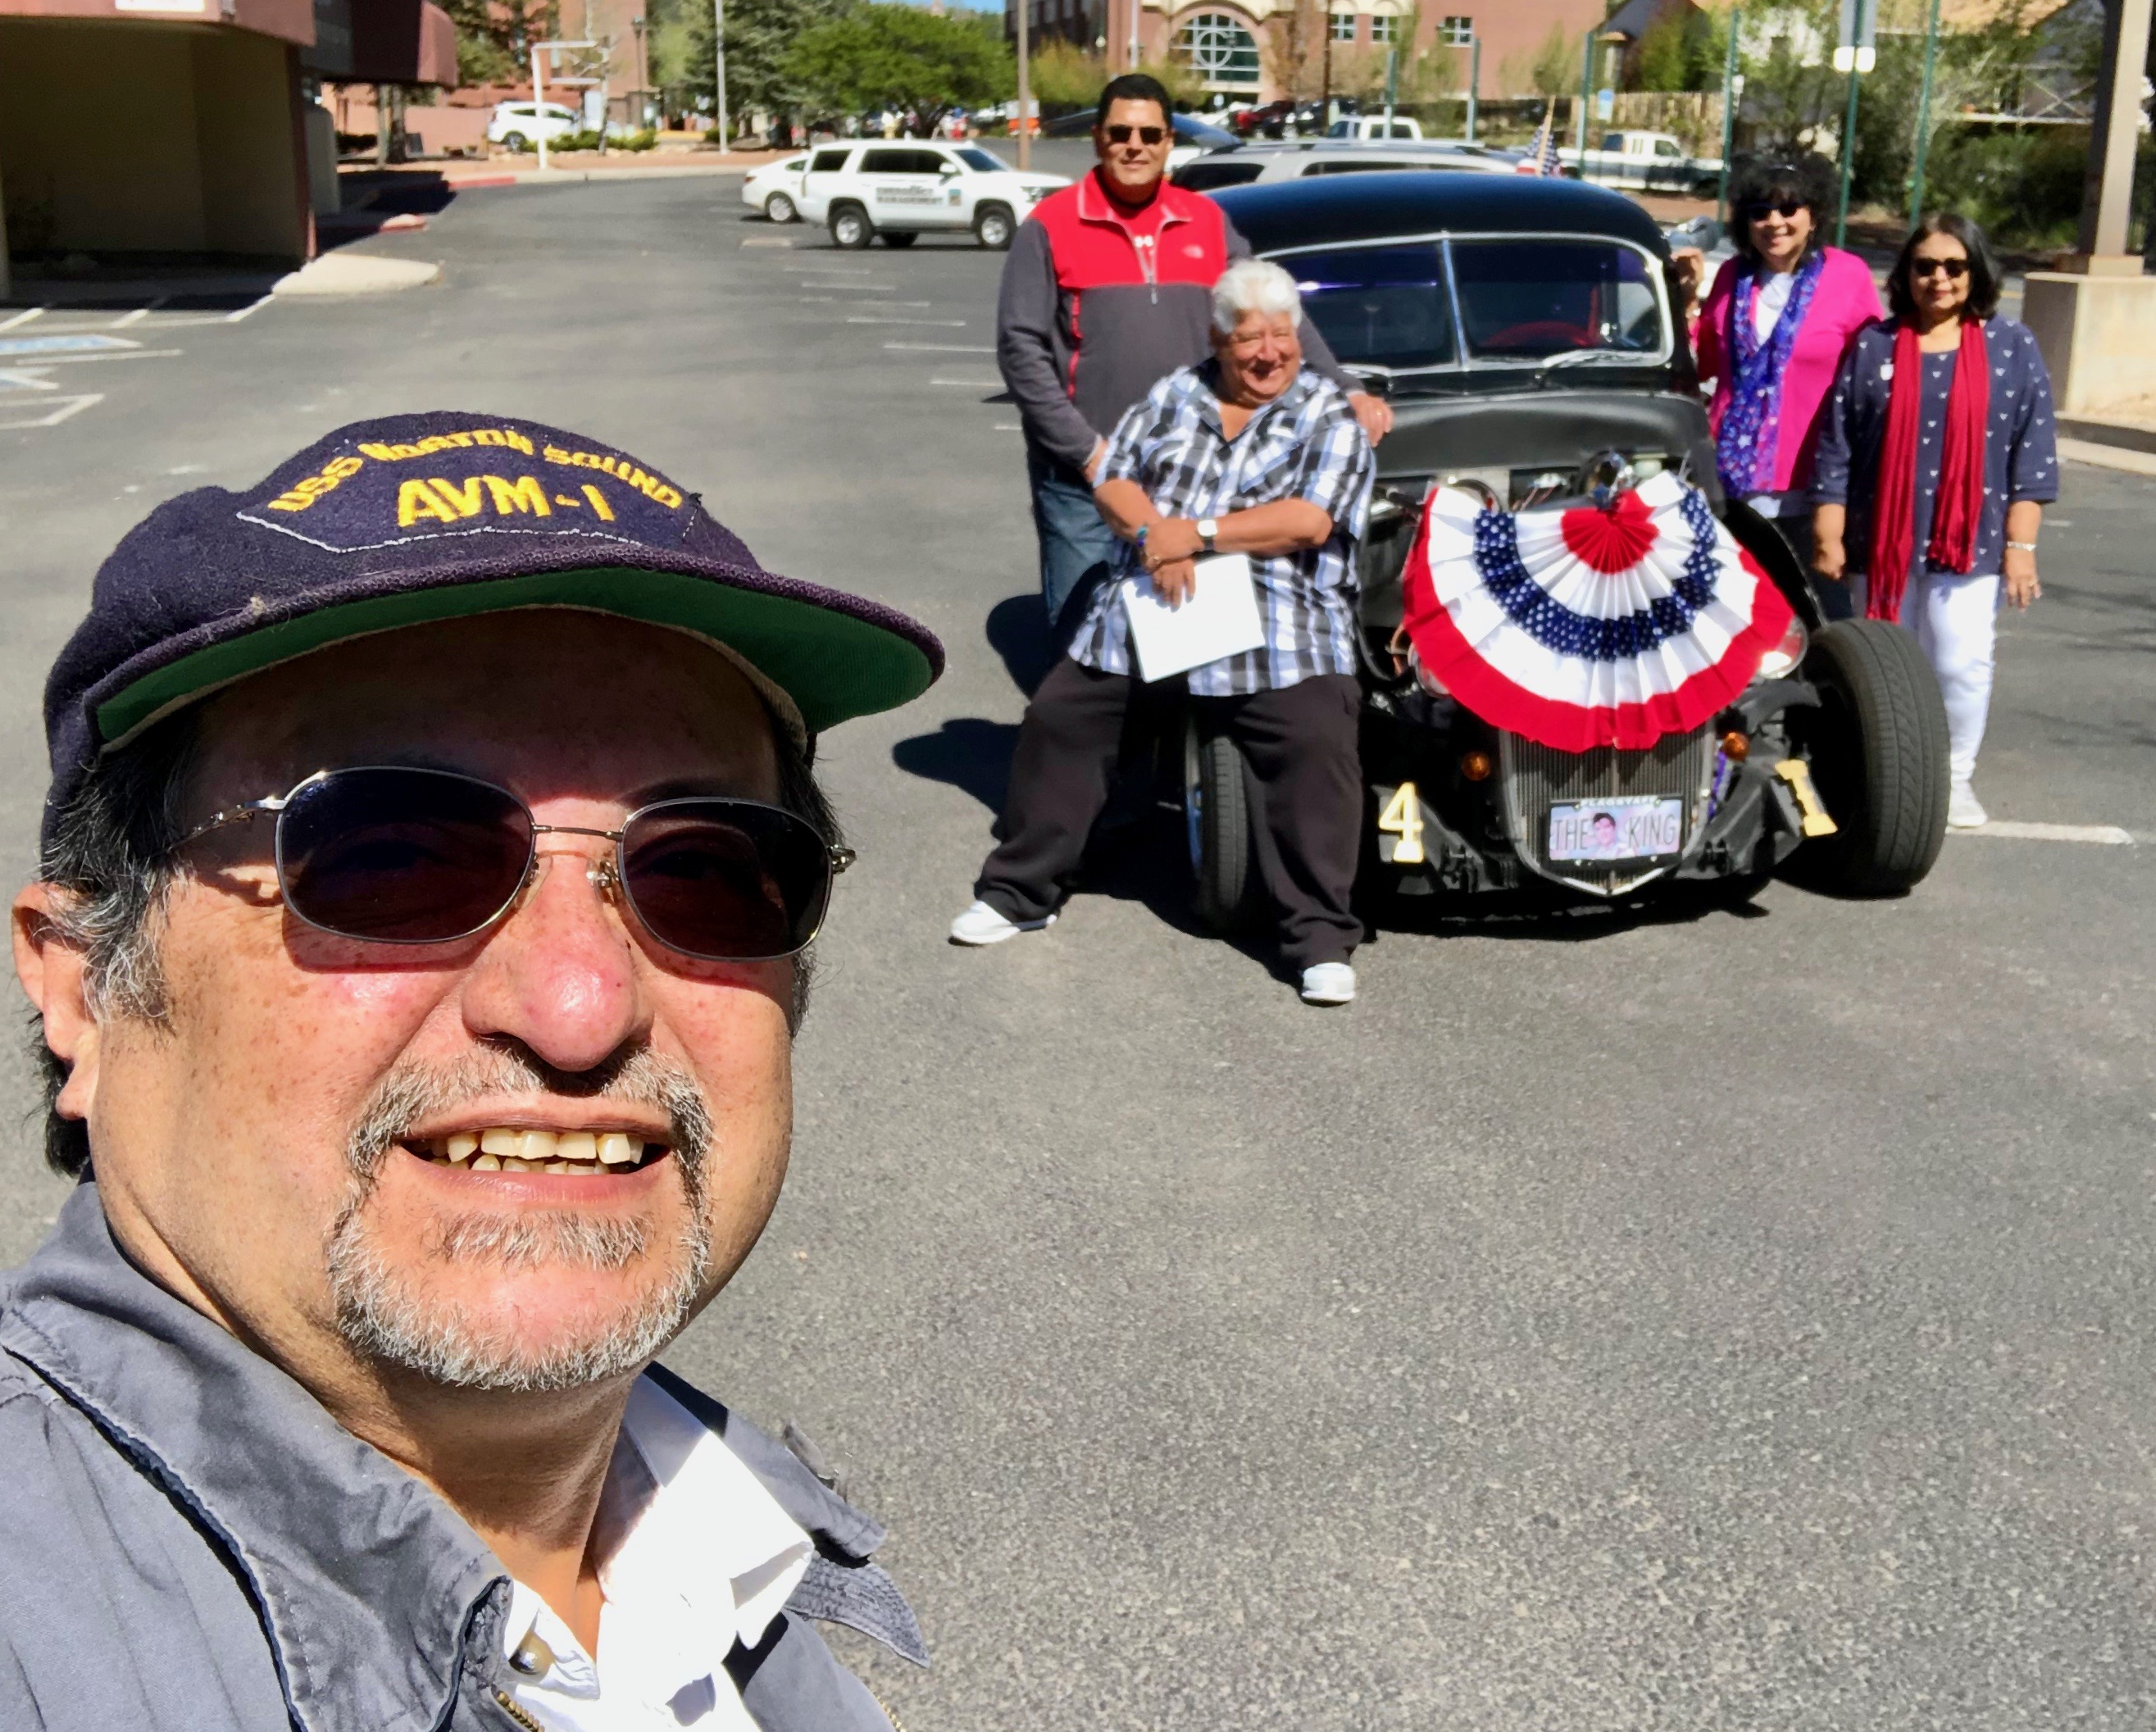 05-18-19 Armed Forces Parade-03